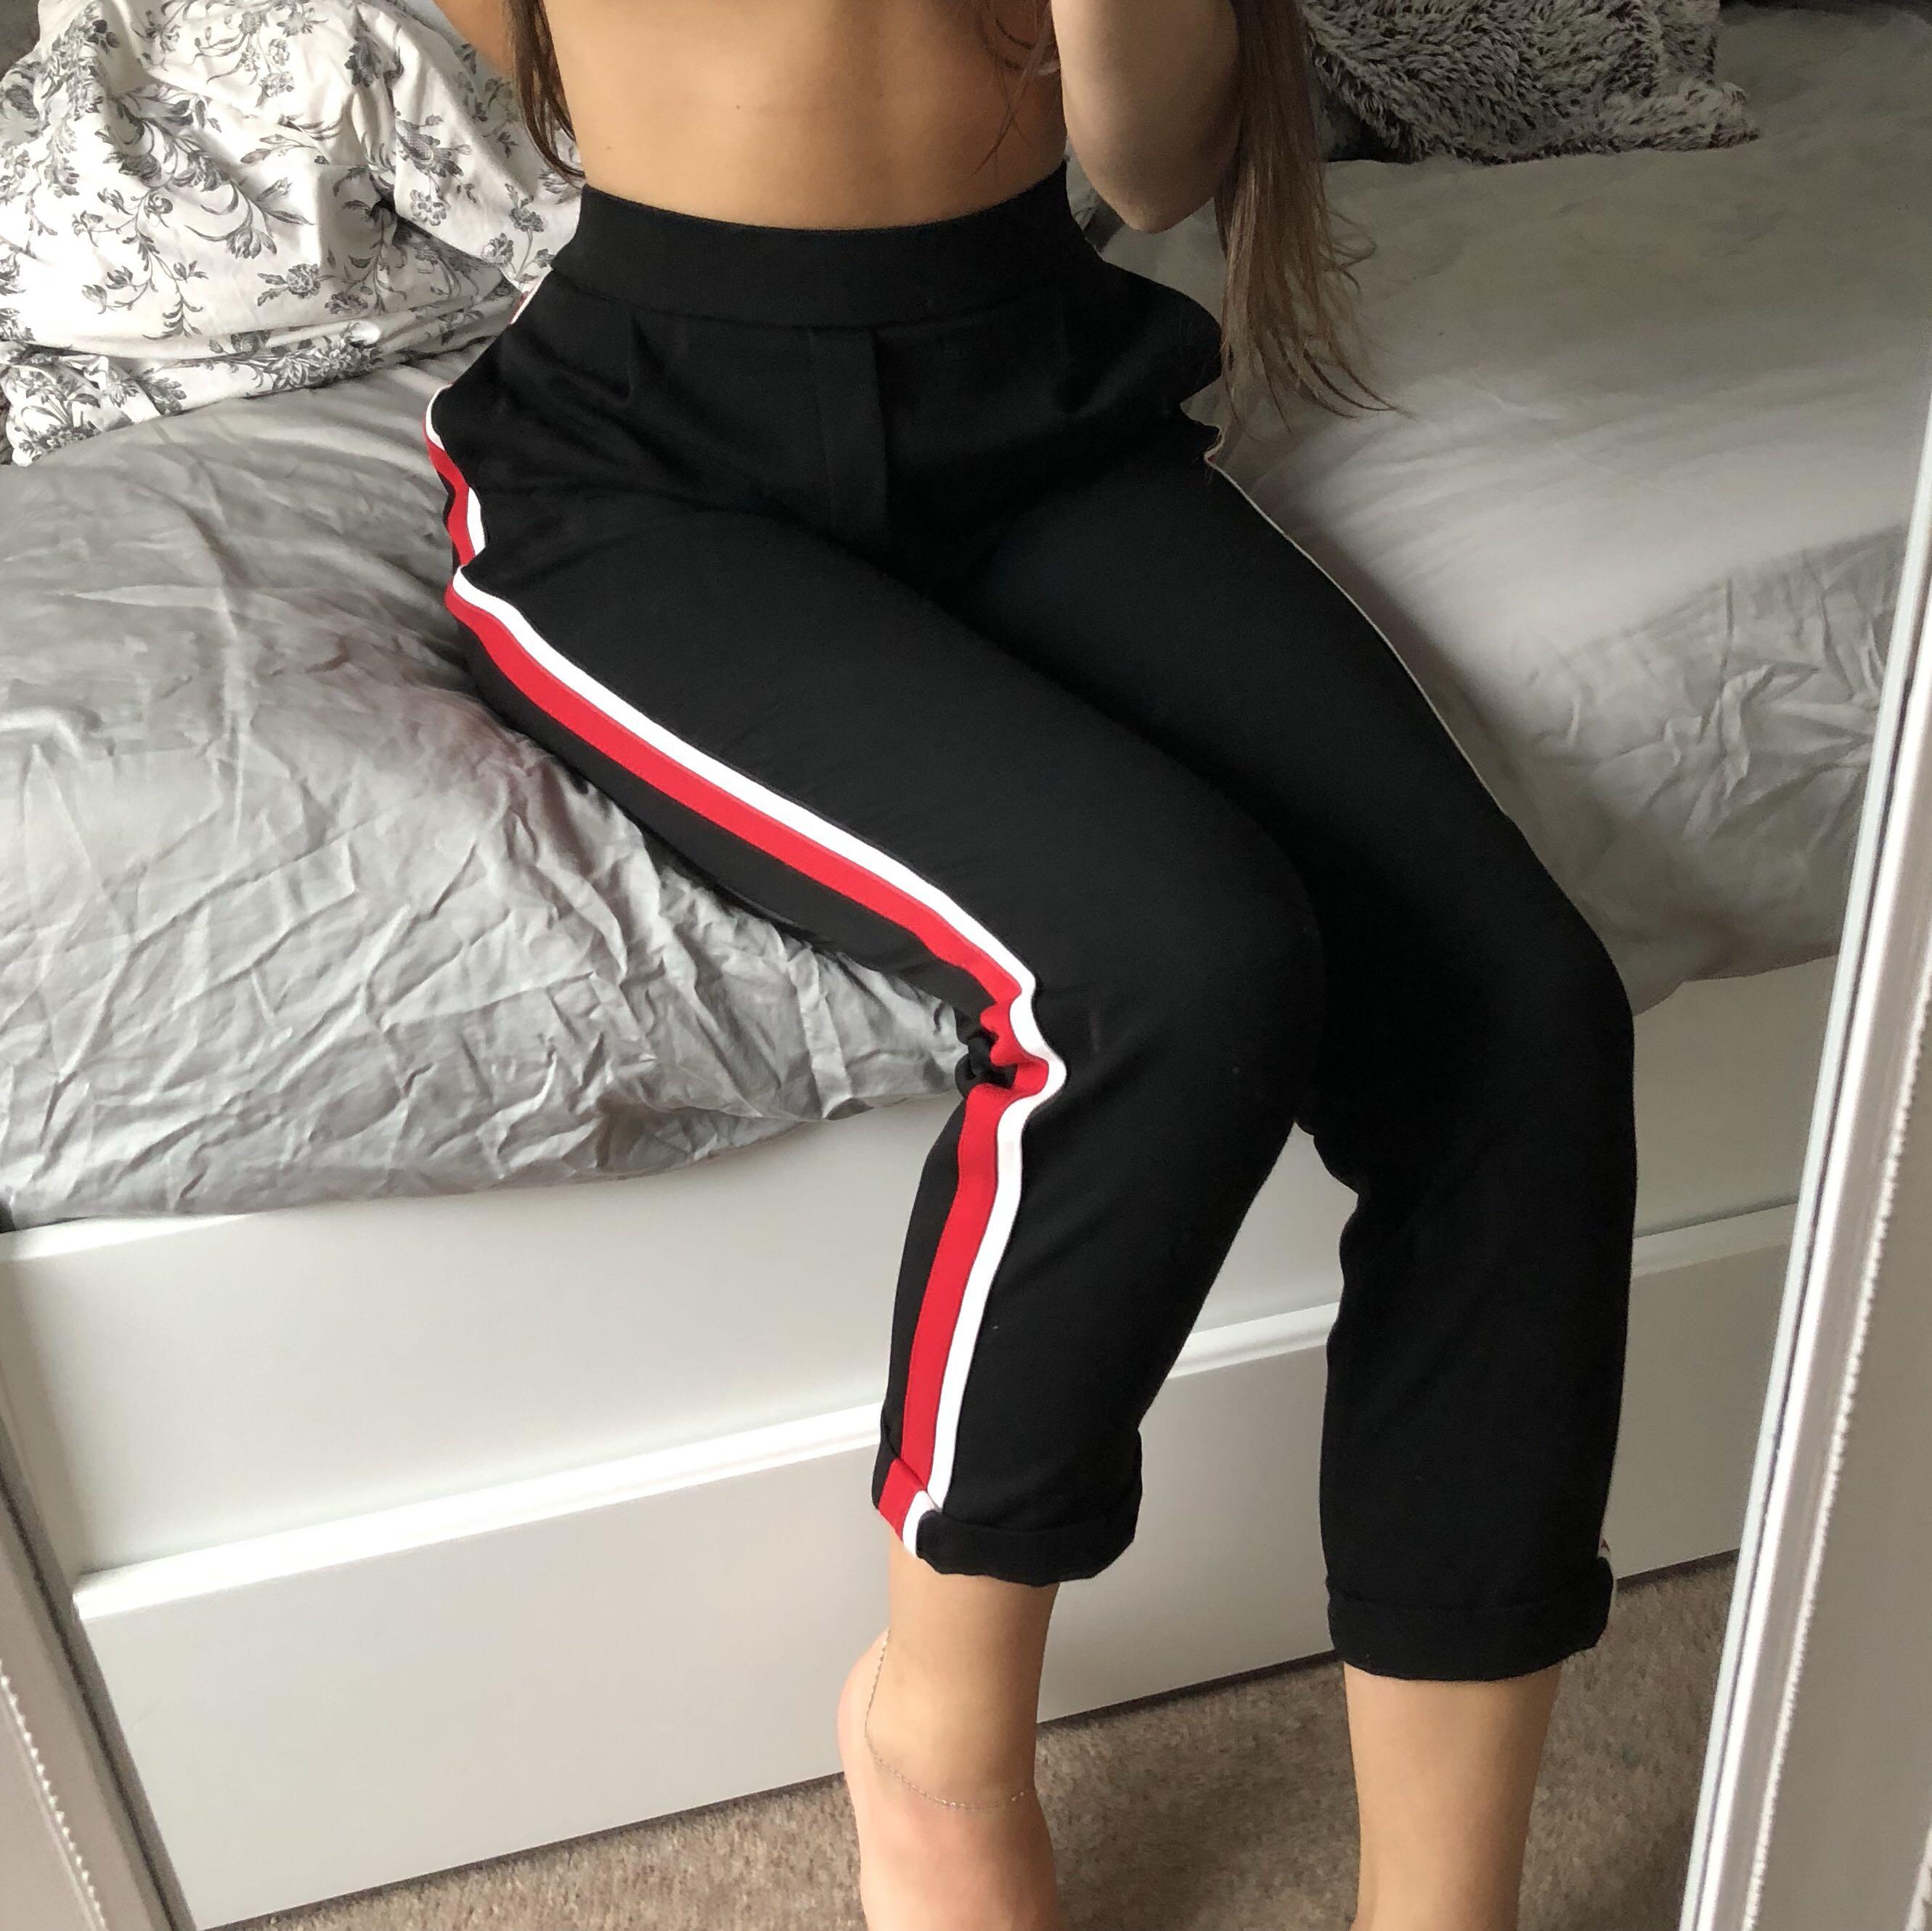 black pants with red and white stripe